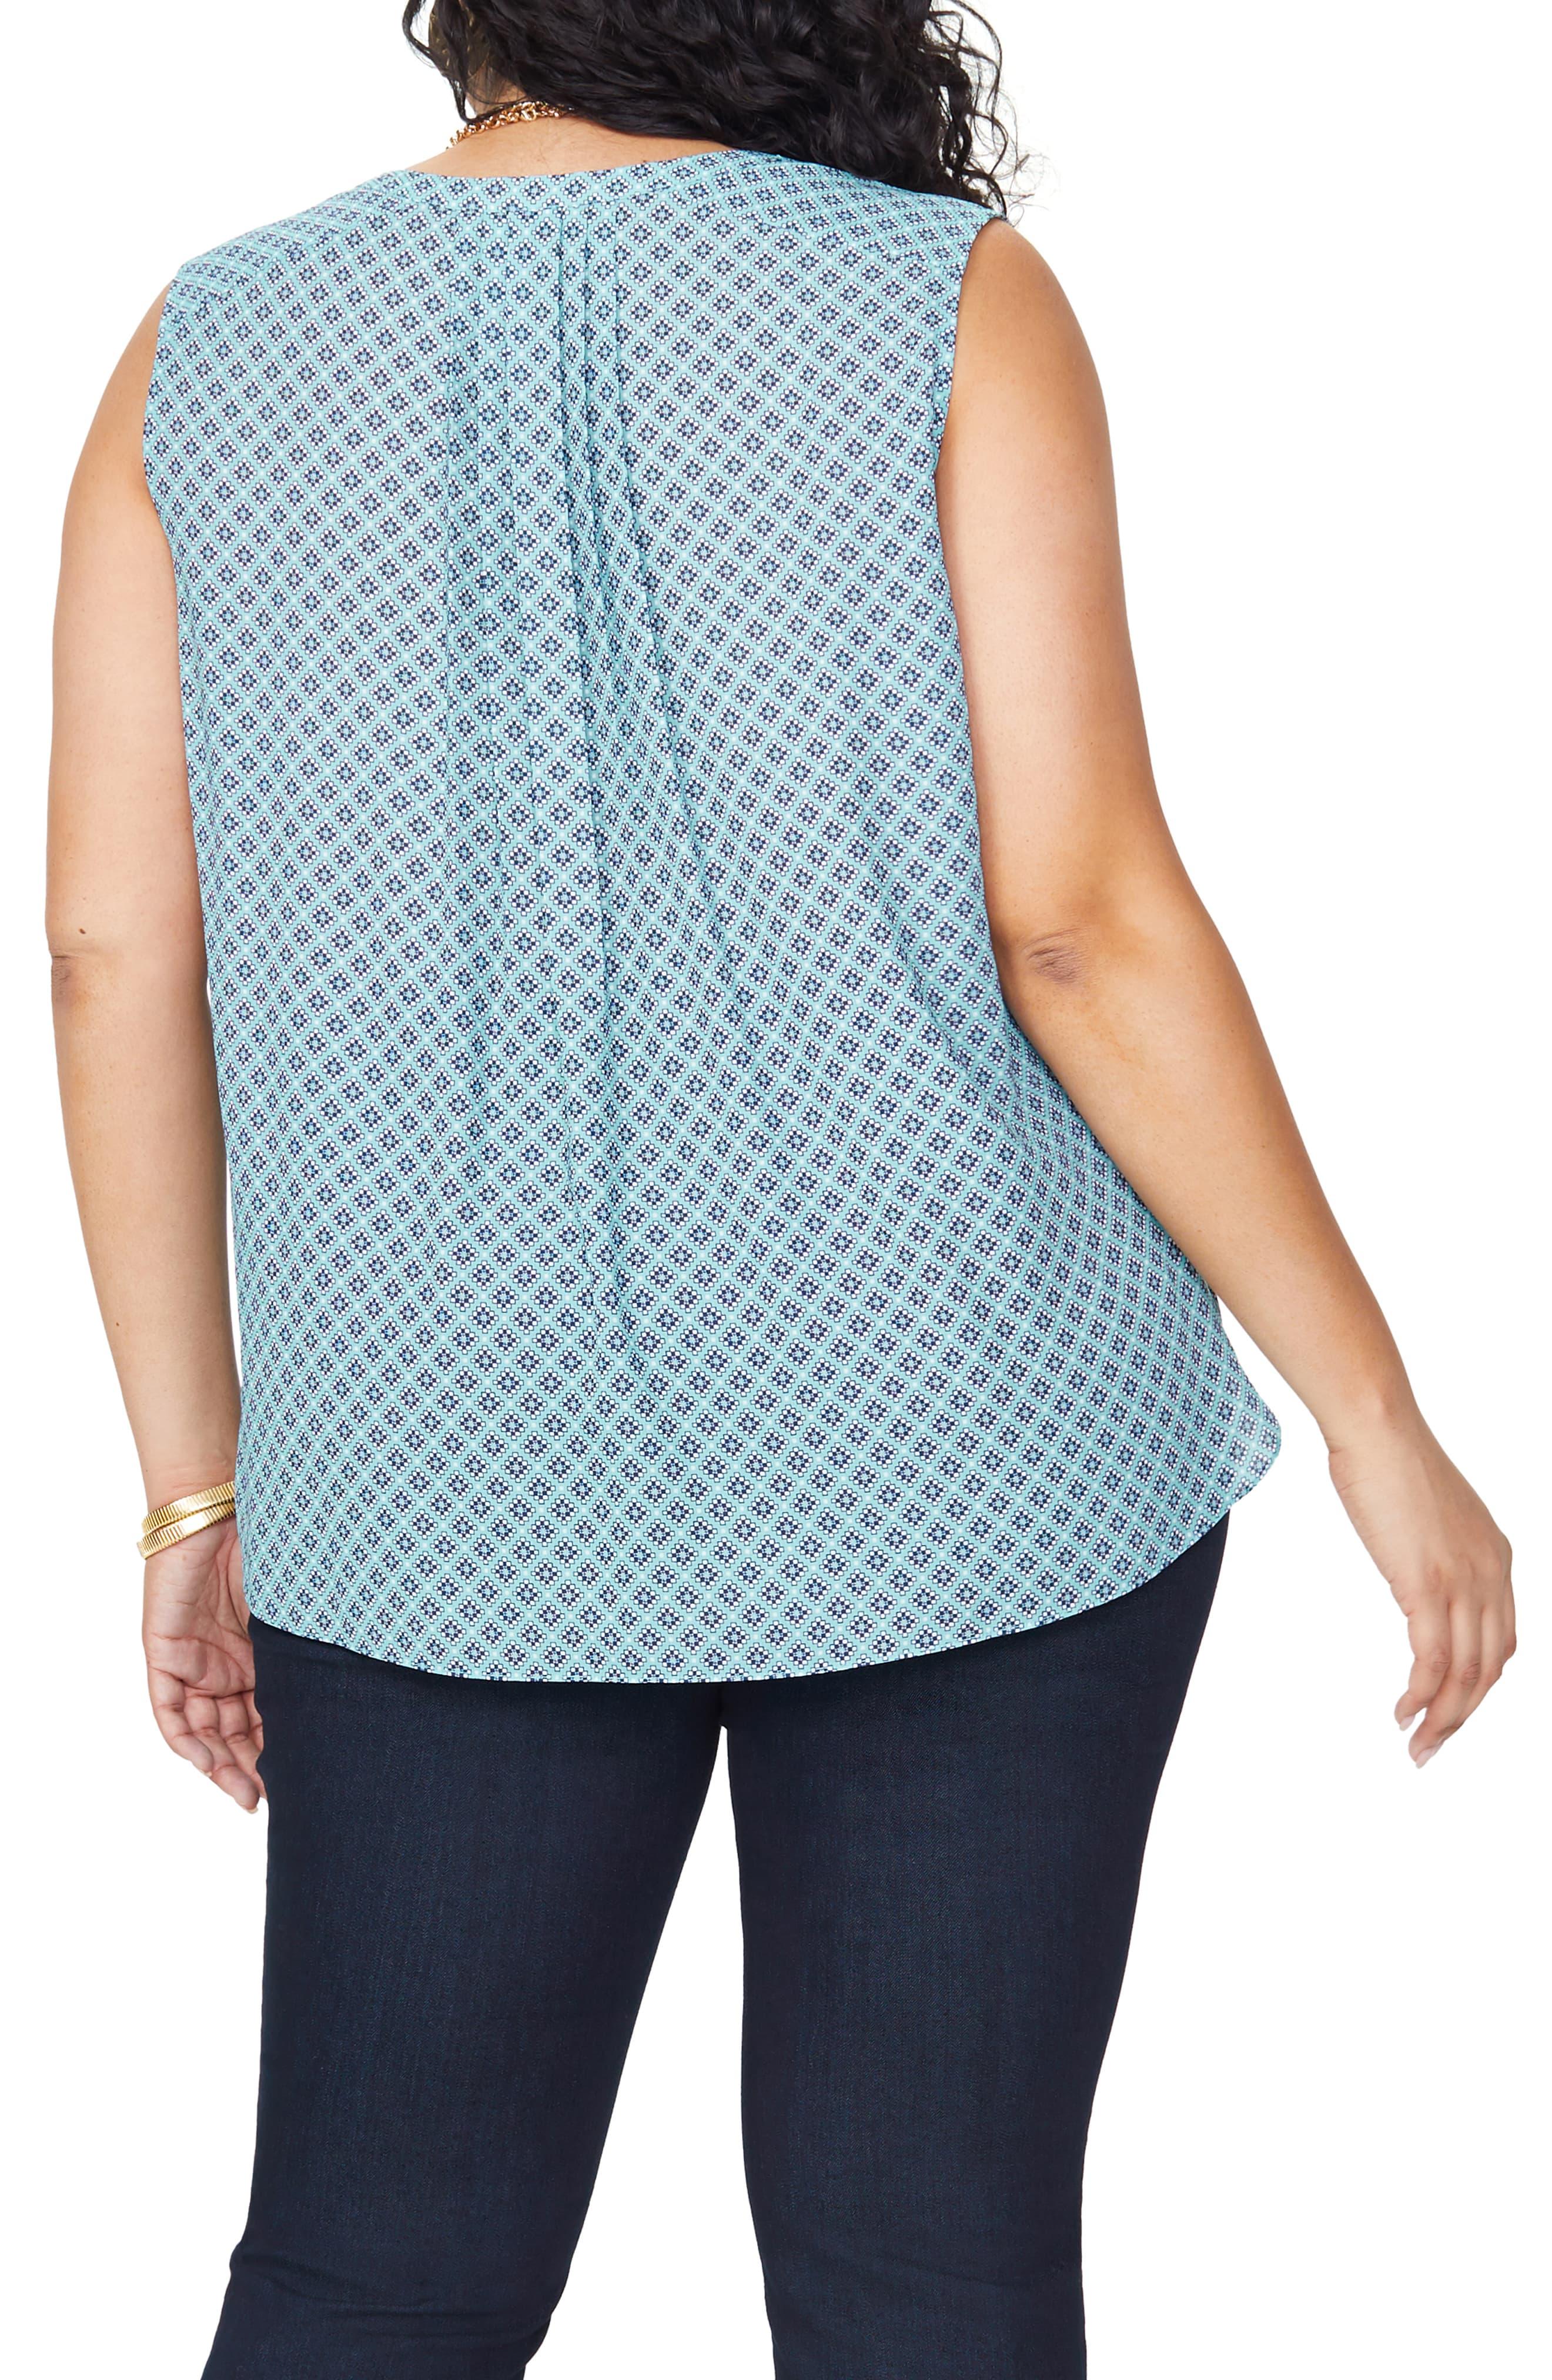 NYDJ Curves 360 By Perfect Sleeveless Top in Blue - Lyst